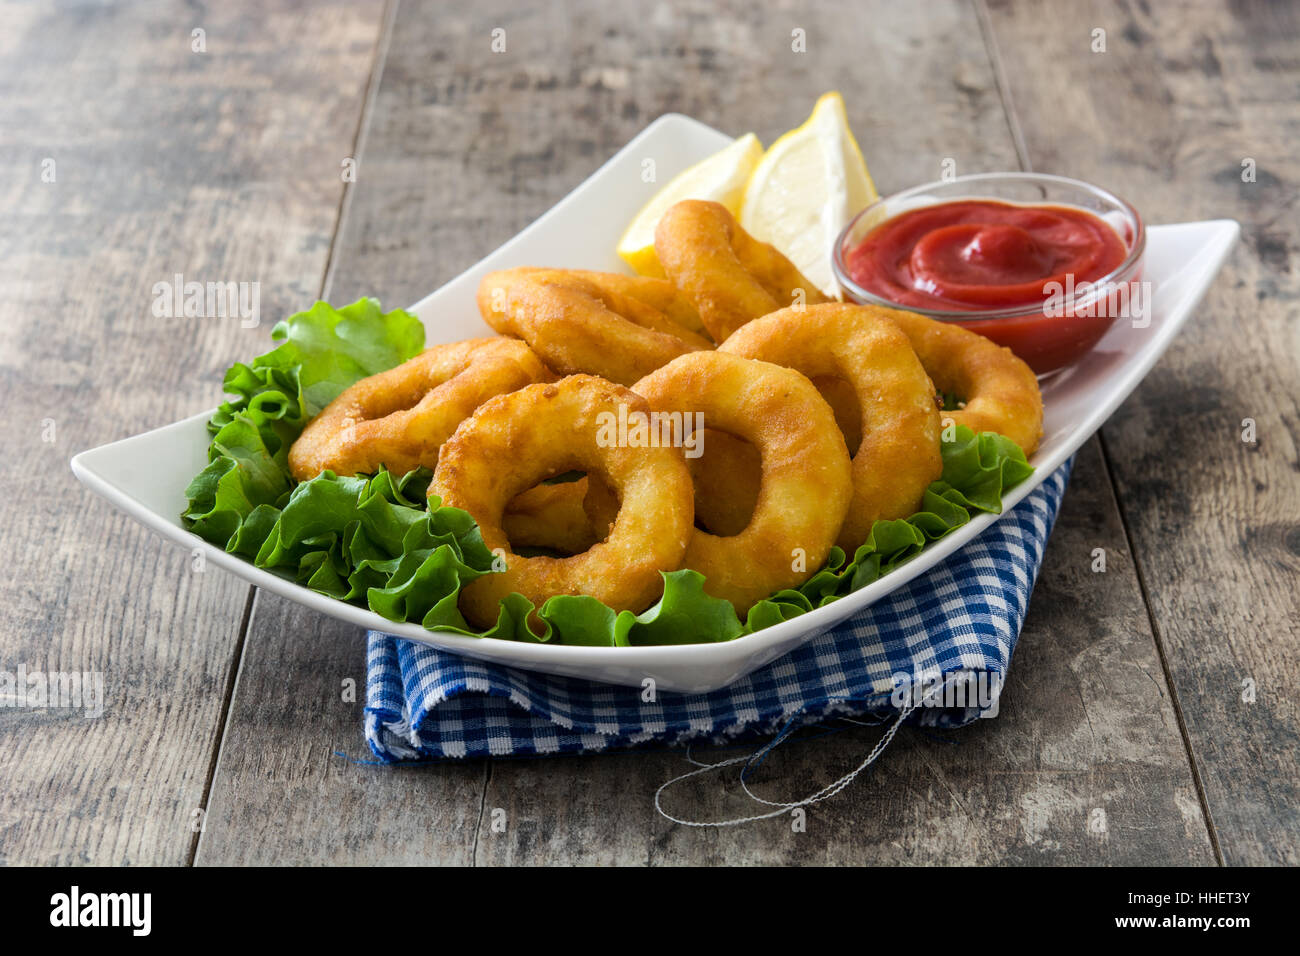 Fried calamari rings with lettuce and ketchup on wooden background Stock Photo